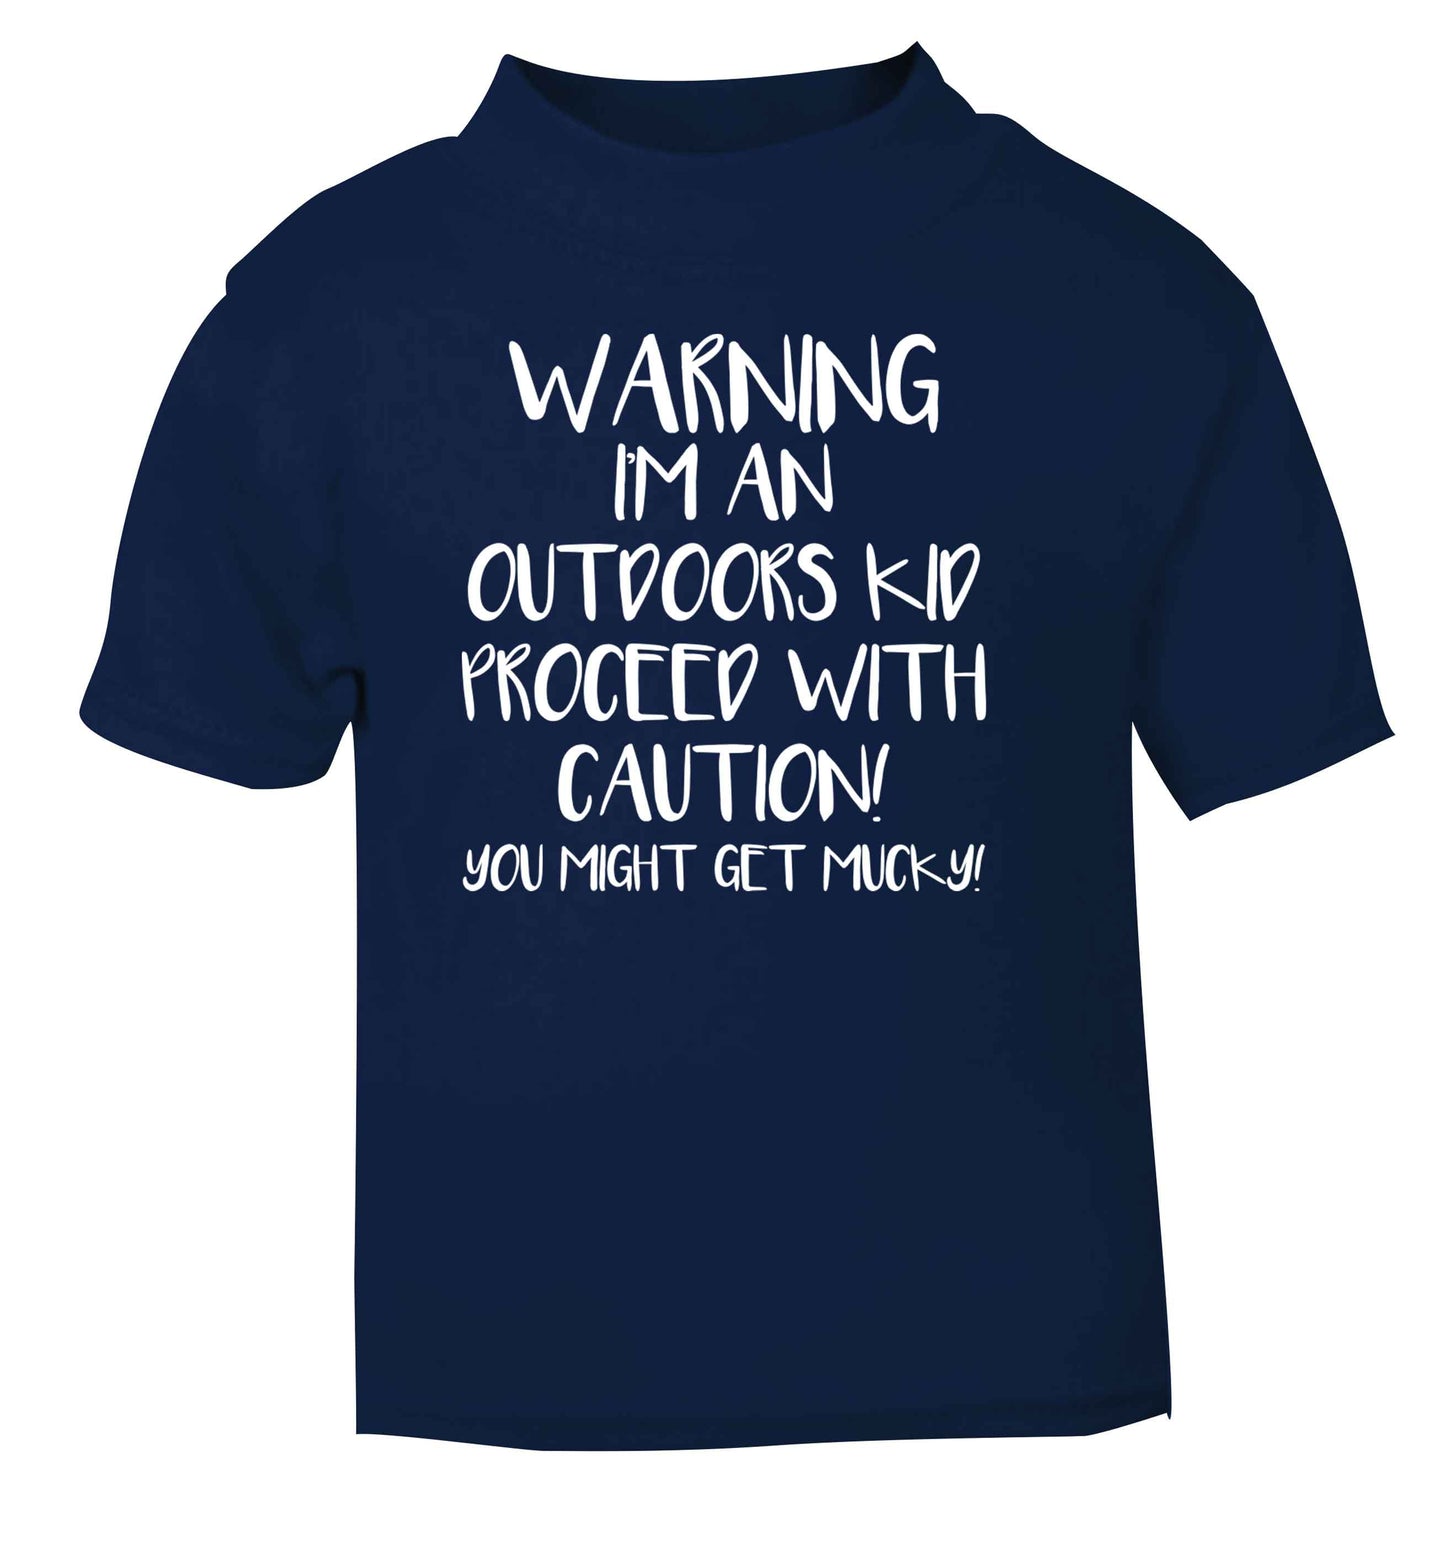 Warning I'm an outdoors kid! Proceed with caution you might get mucky navy Baby Toddler Tshirt 2 Years